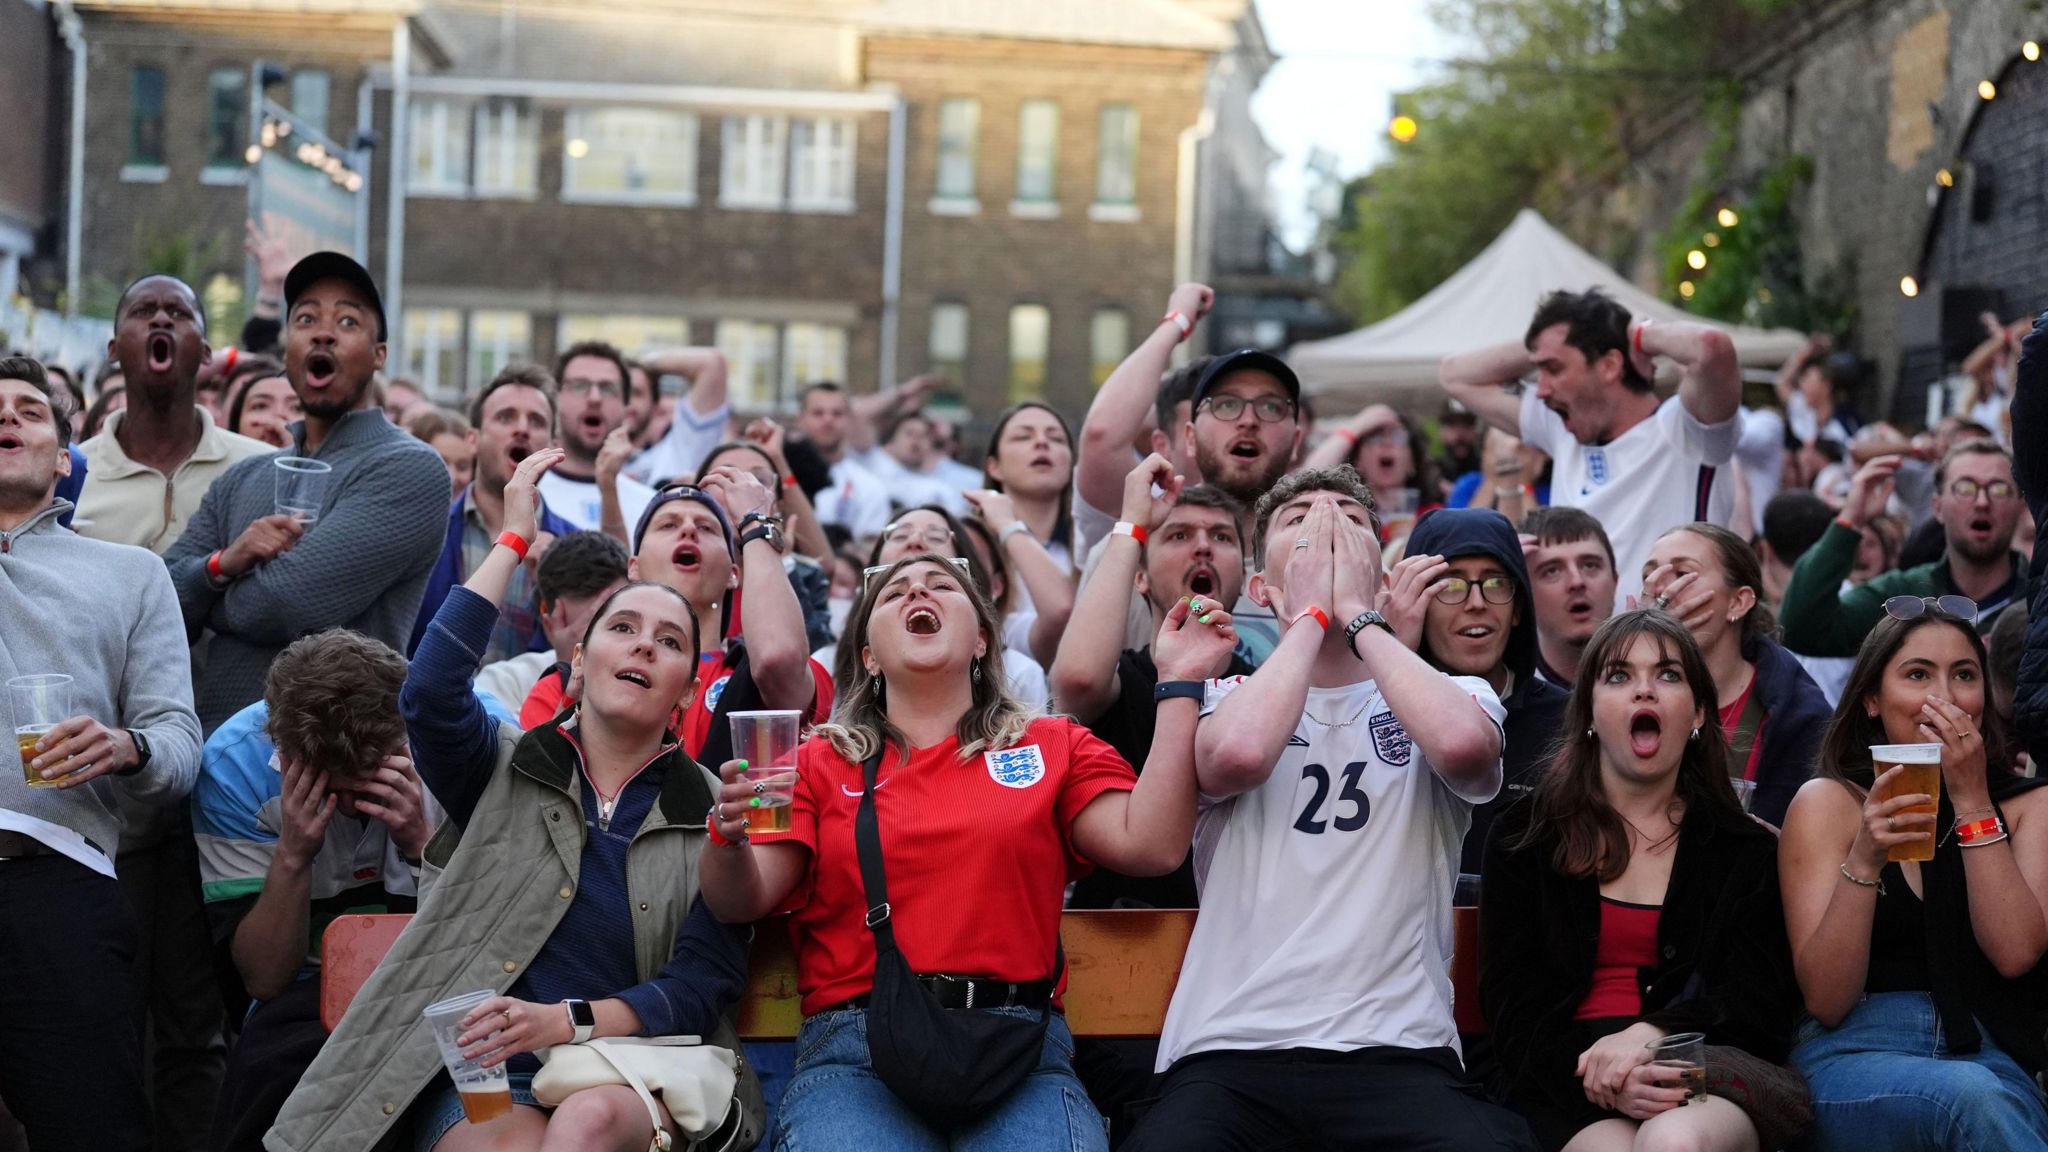 A group of England fans sitting in a fan zone. The are reacting to a moment in the game, with some people with their mouths open, others with hands on their heads, and others covering their mouths